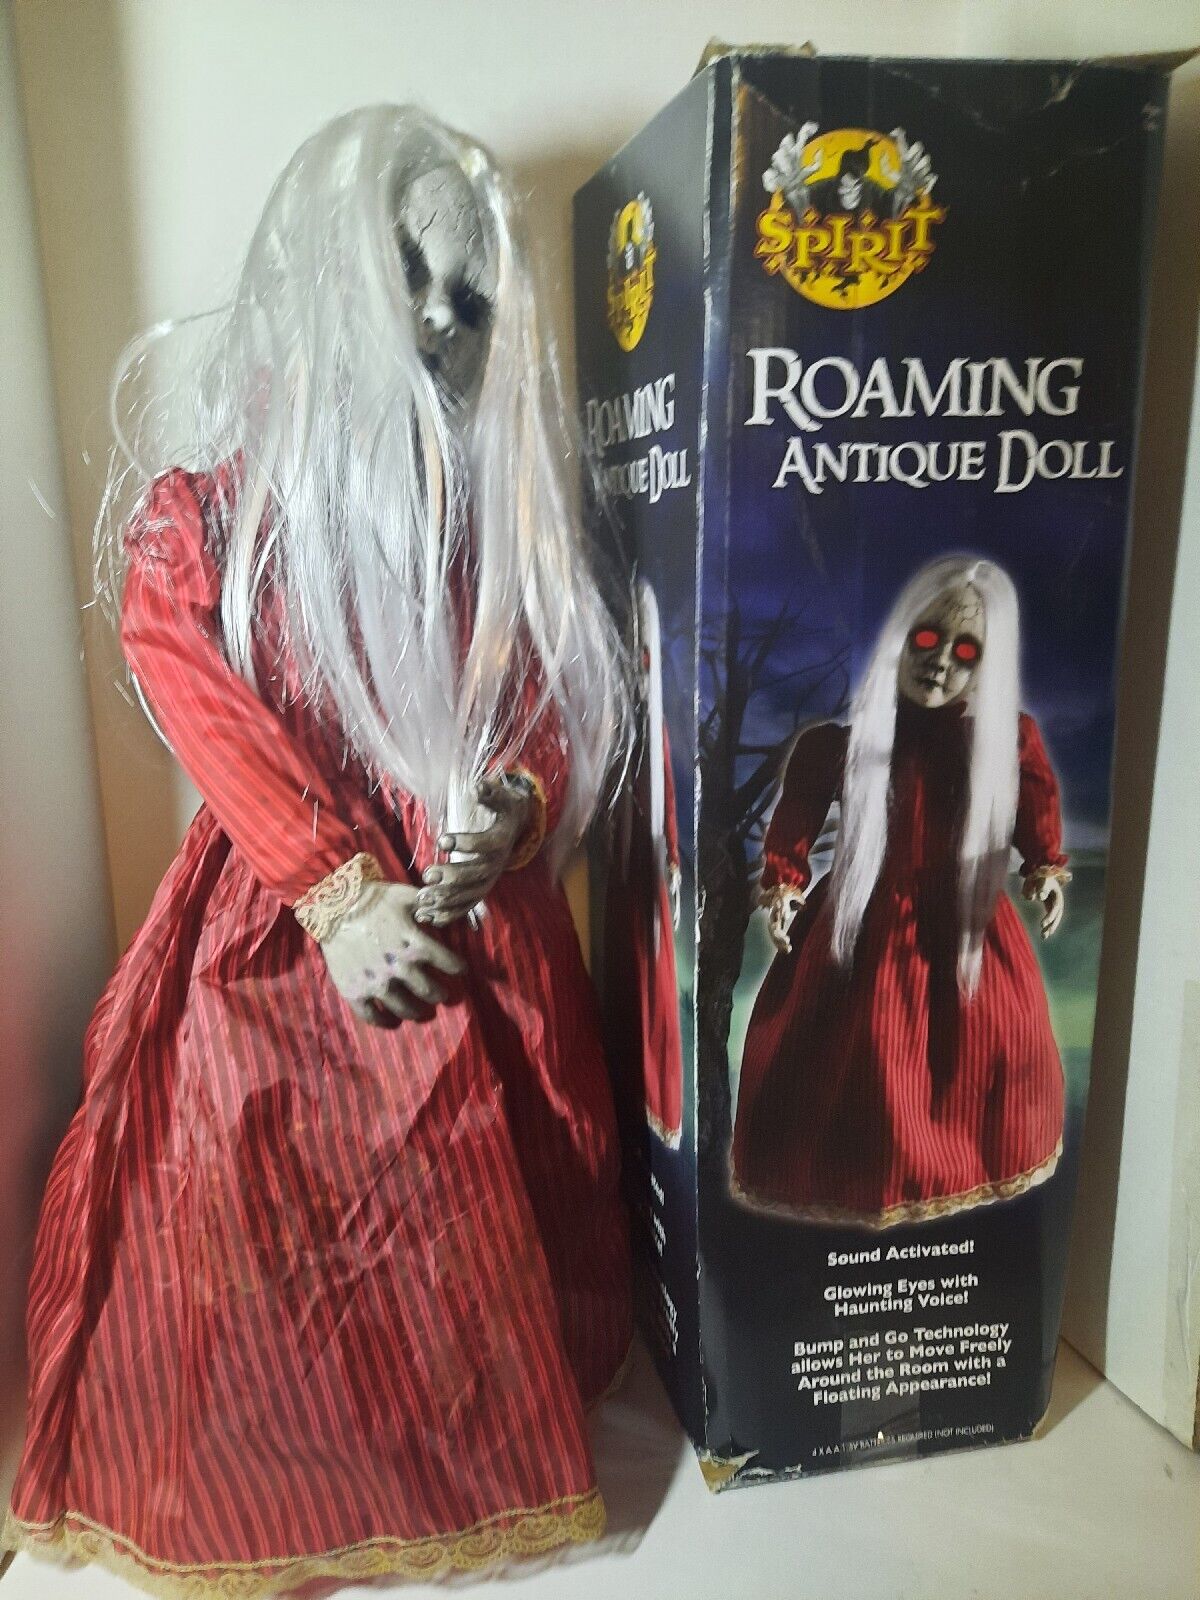 Spirit Halloween ROAMING ANTIQUE DOLL-FLOATING Sound Activated Haunted Animated